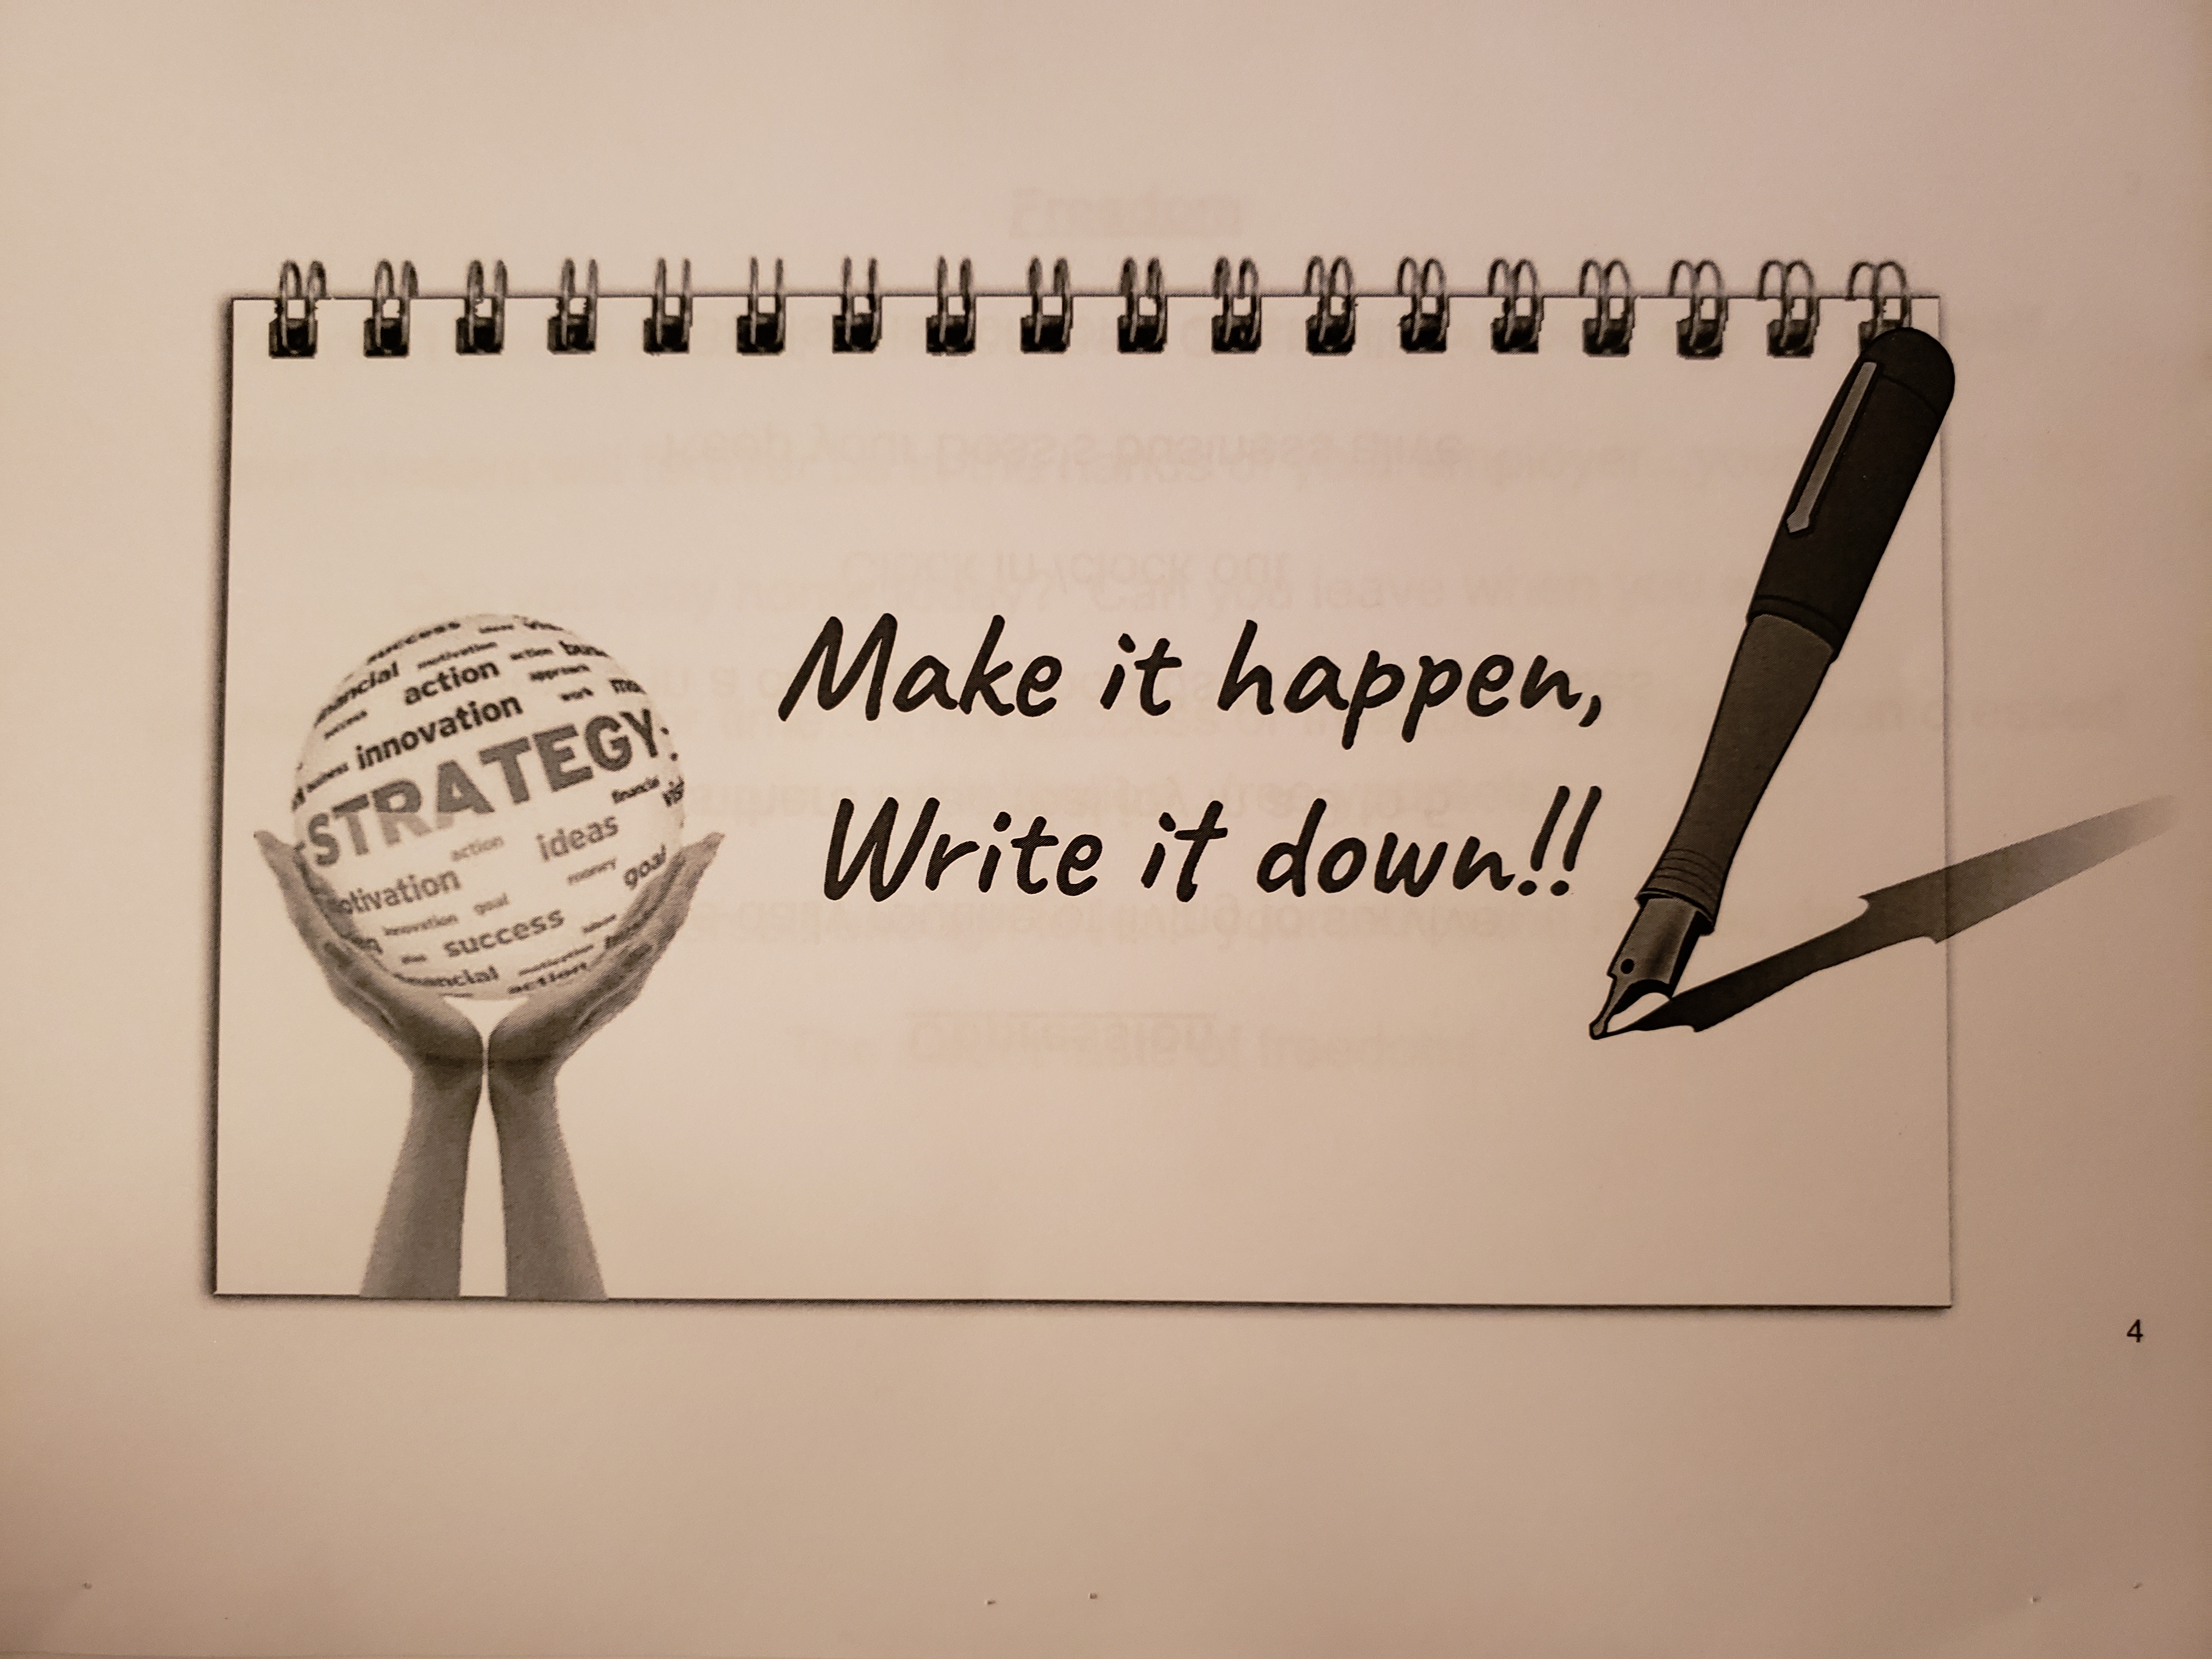 Don't keep a good idea in your head, write it down!